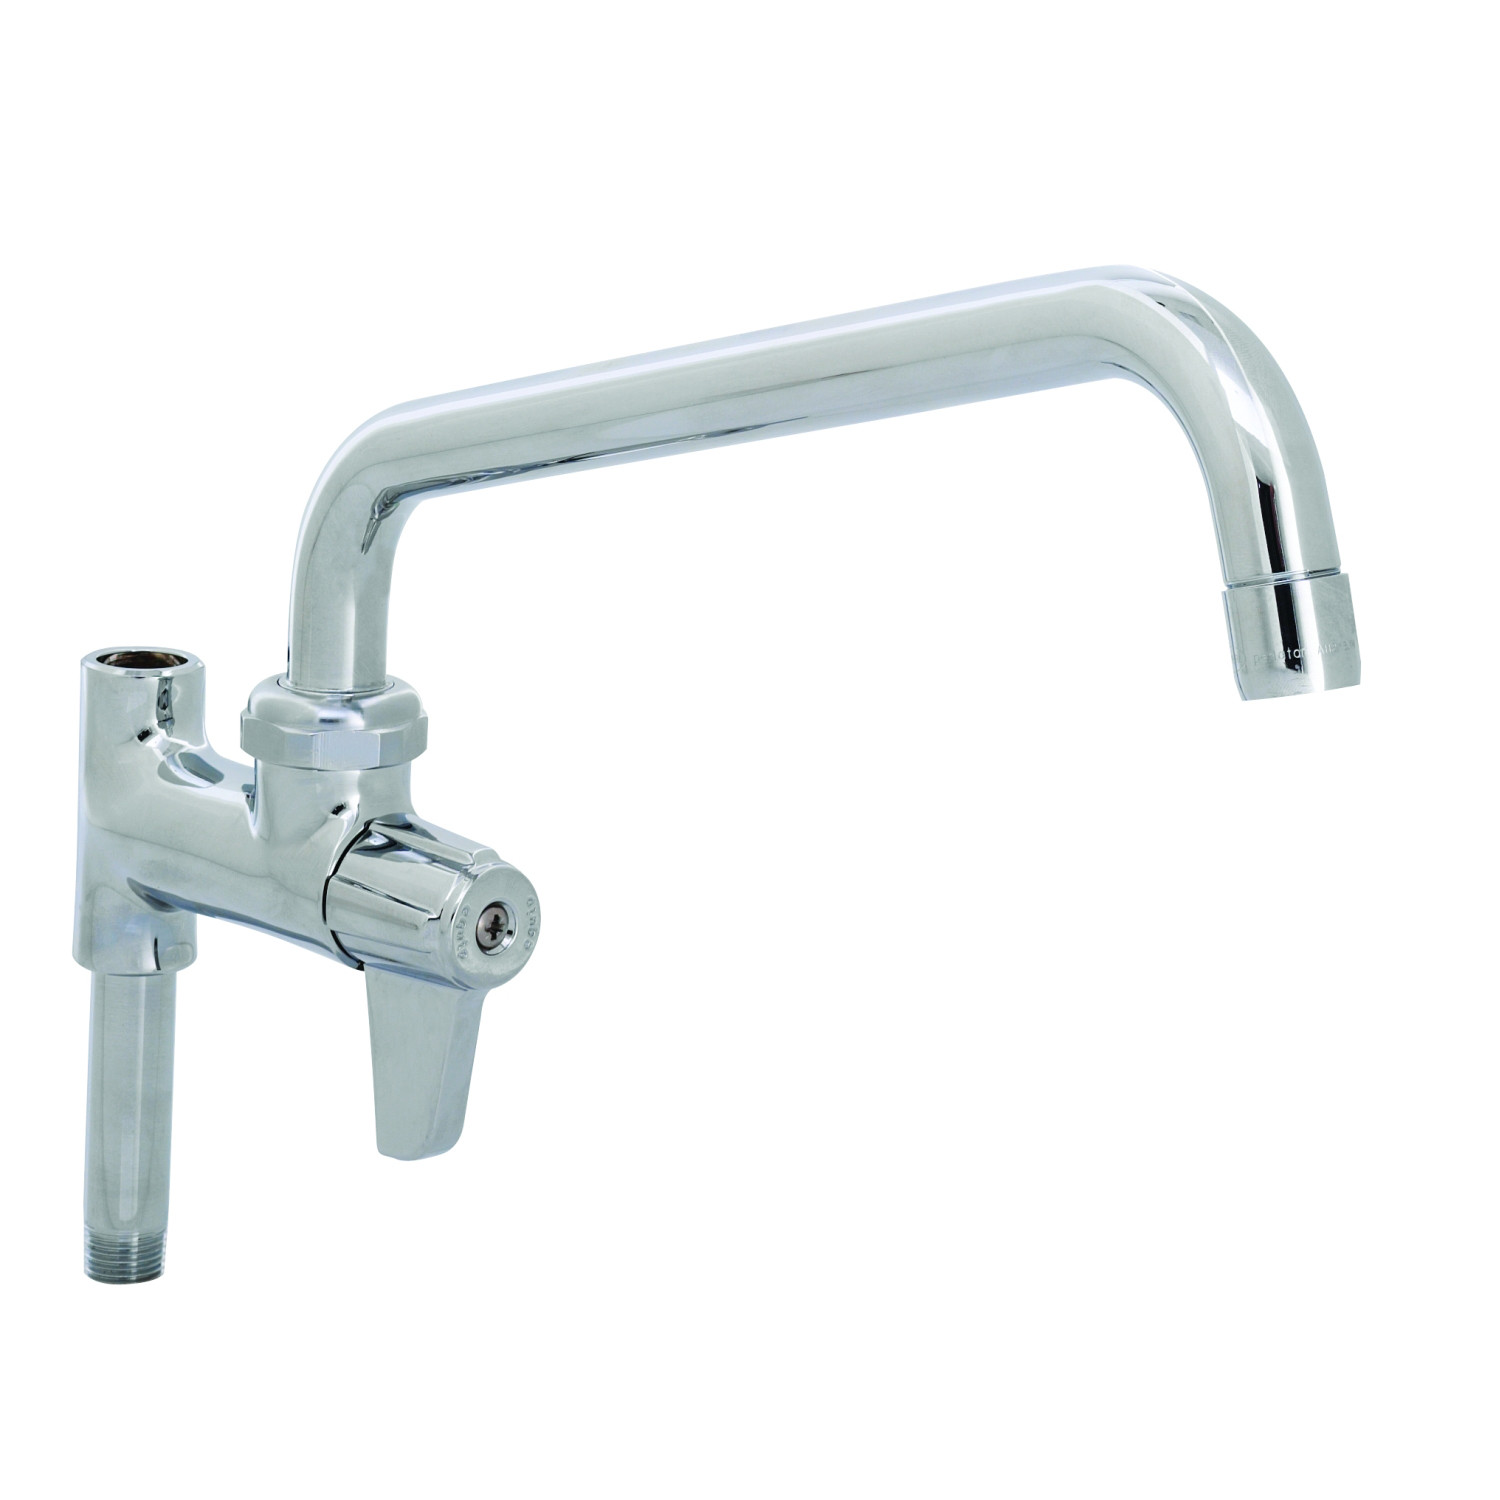 Equip Add-On Faucets: 5AFL12 - T&S Brass